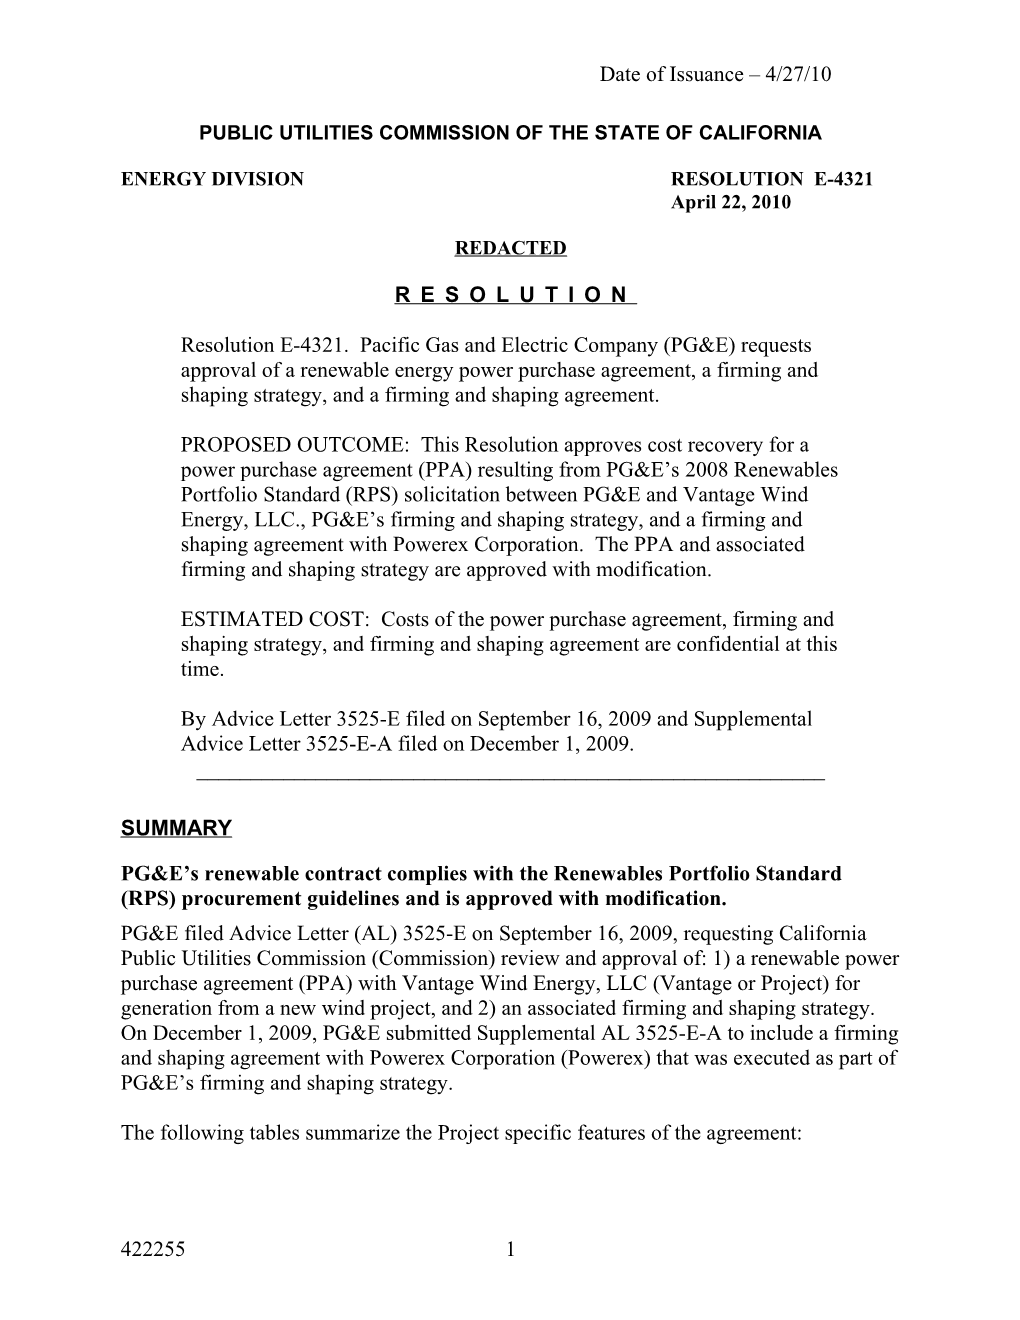 Public Utilities Commission of the State of California s57